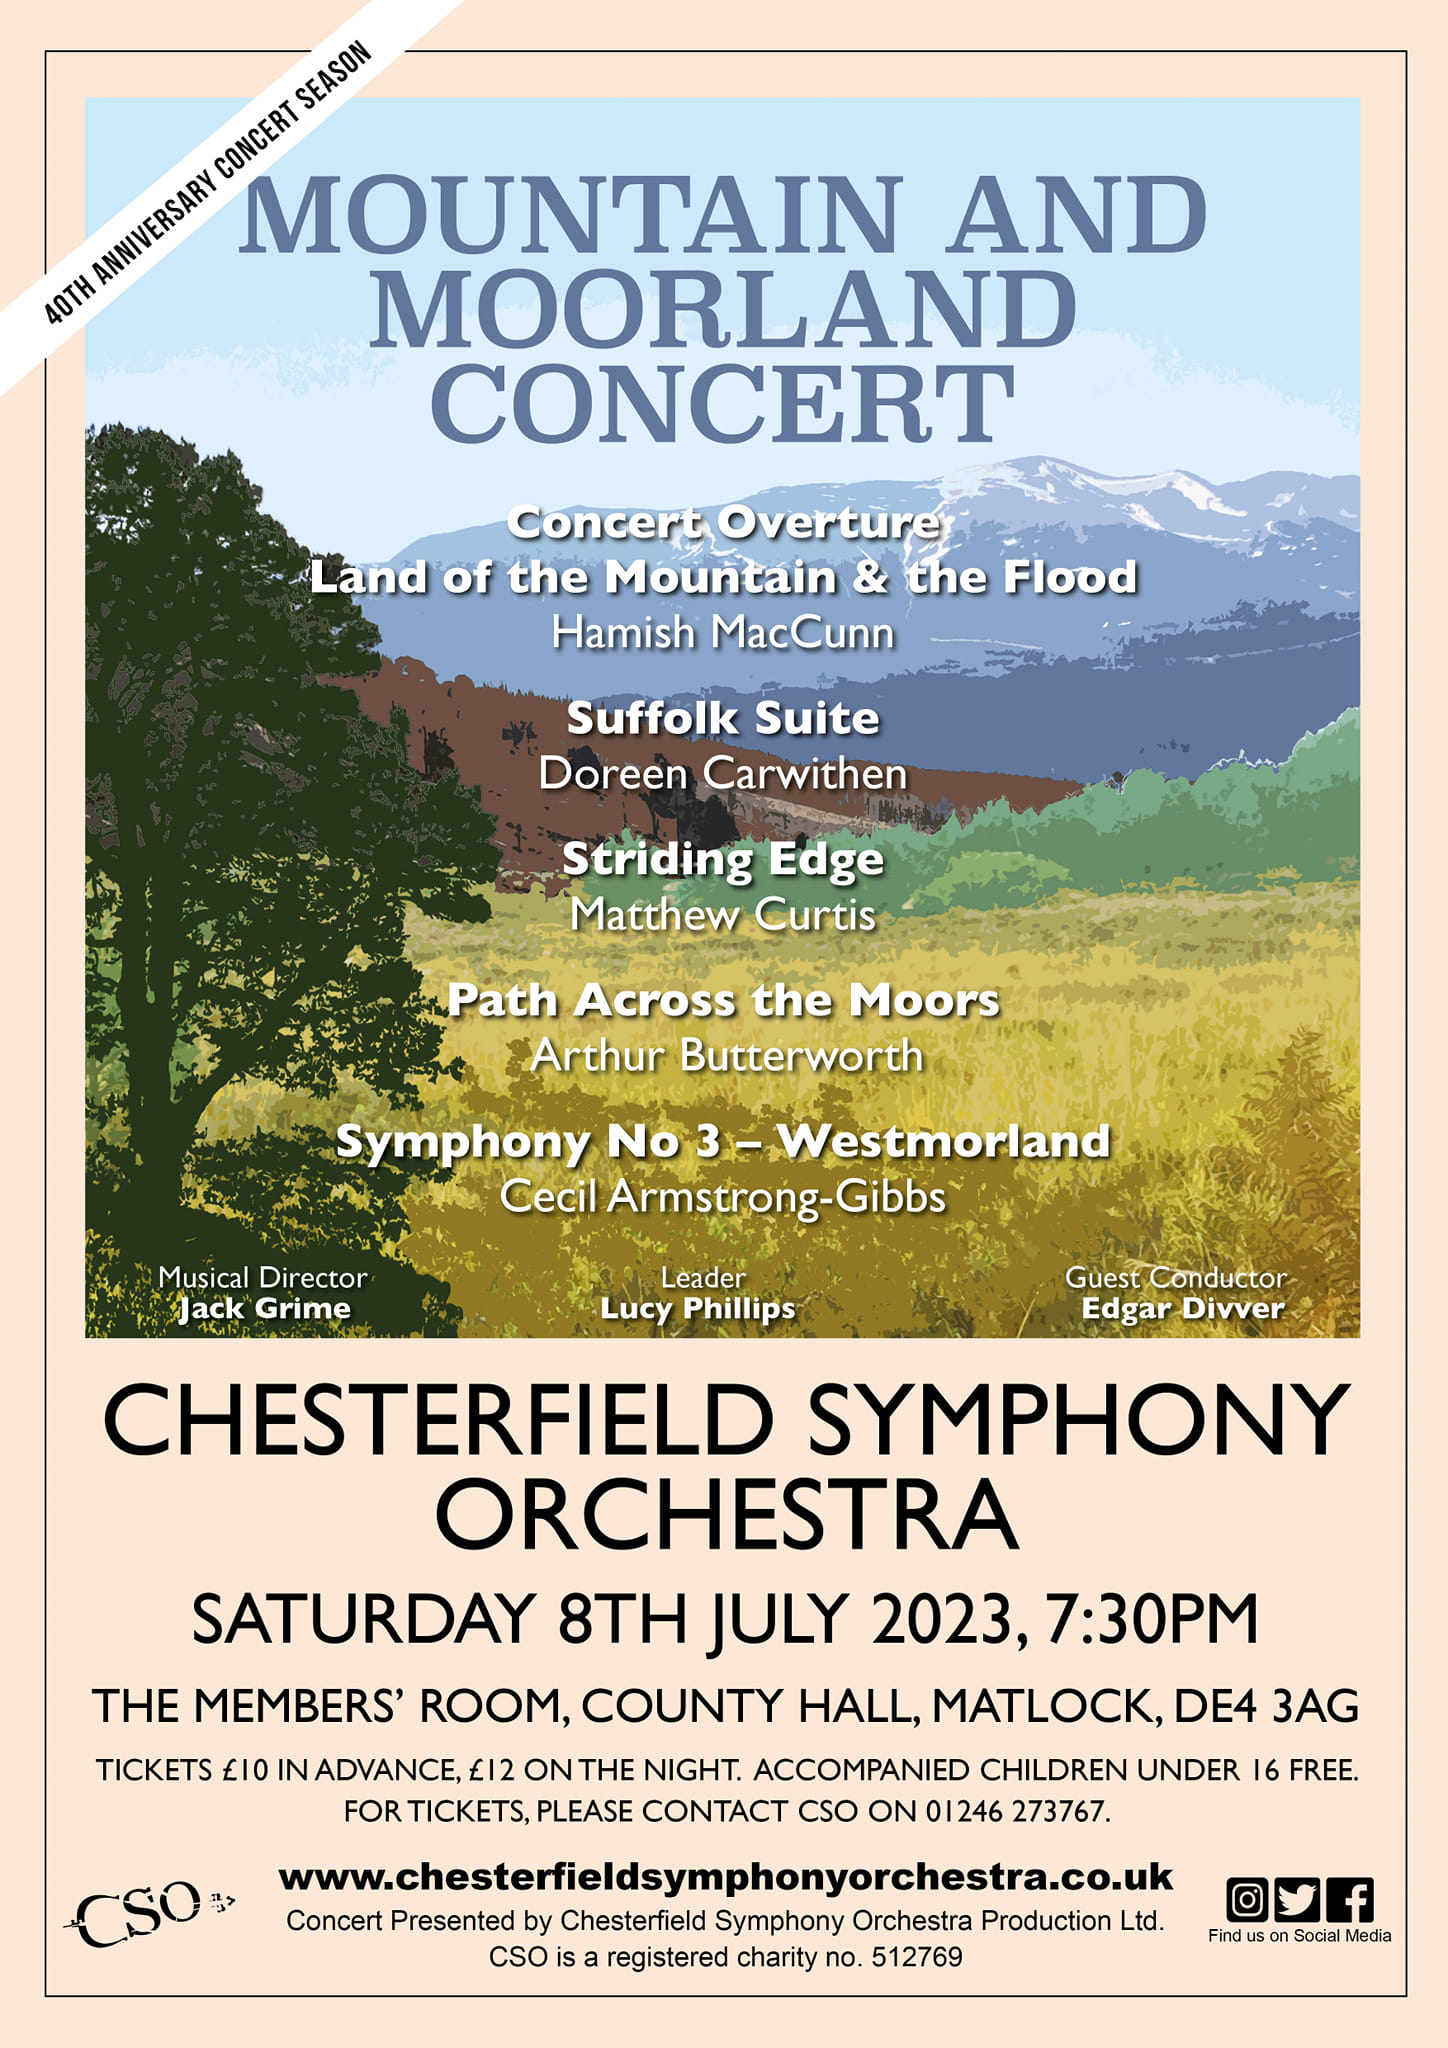 Next Concert 8th July at County Hall, Matlock 7.30pm